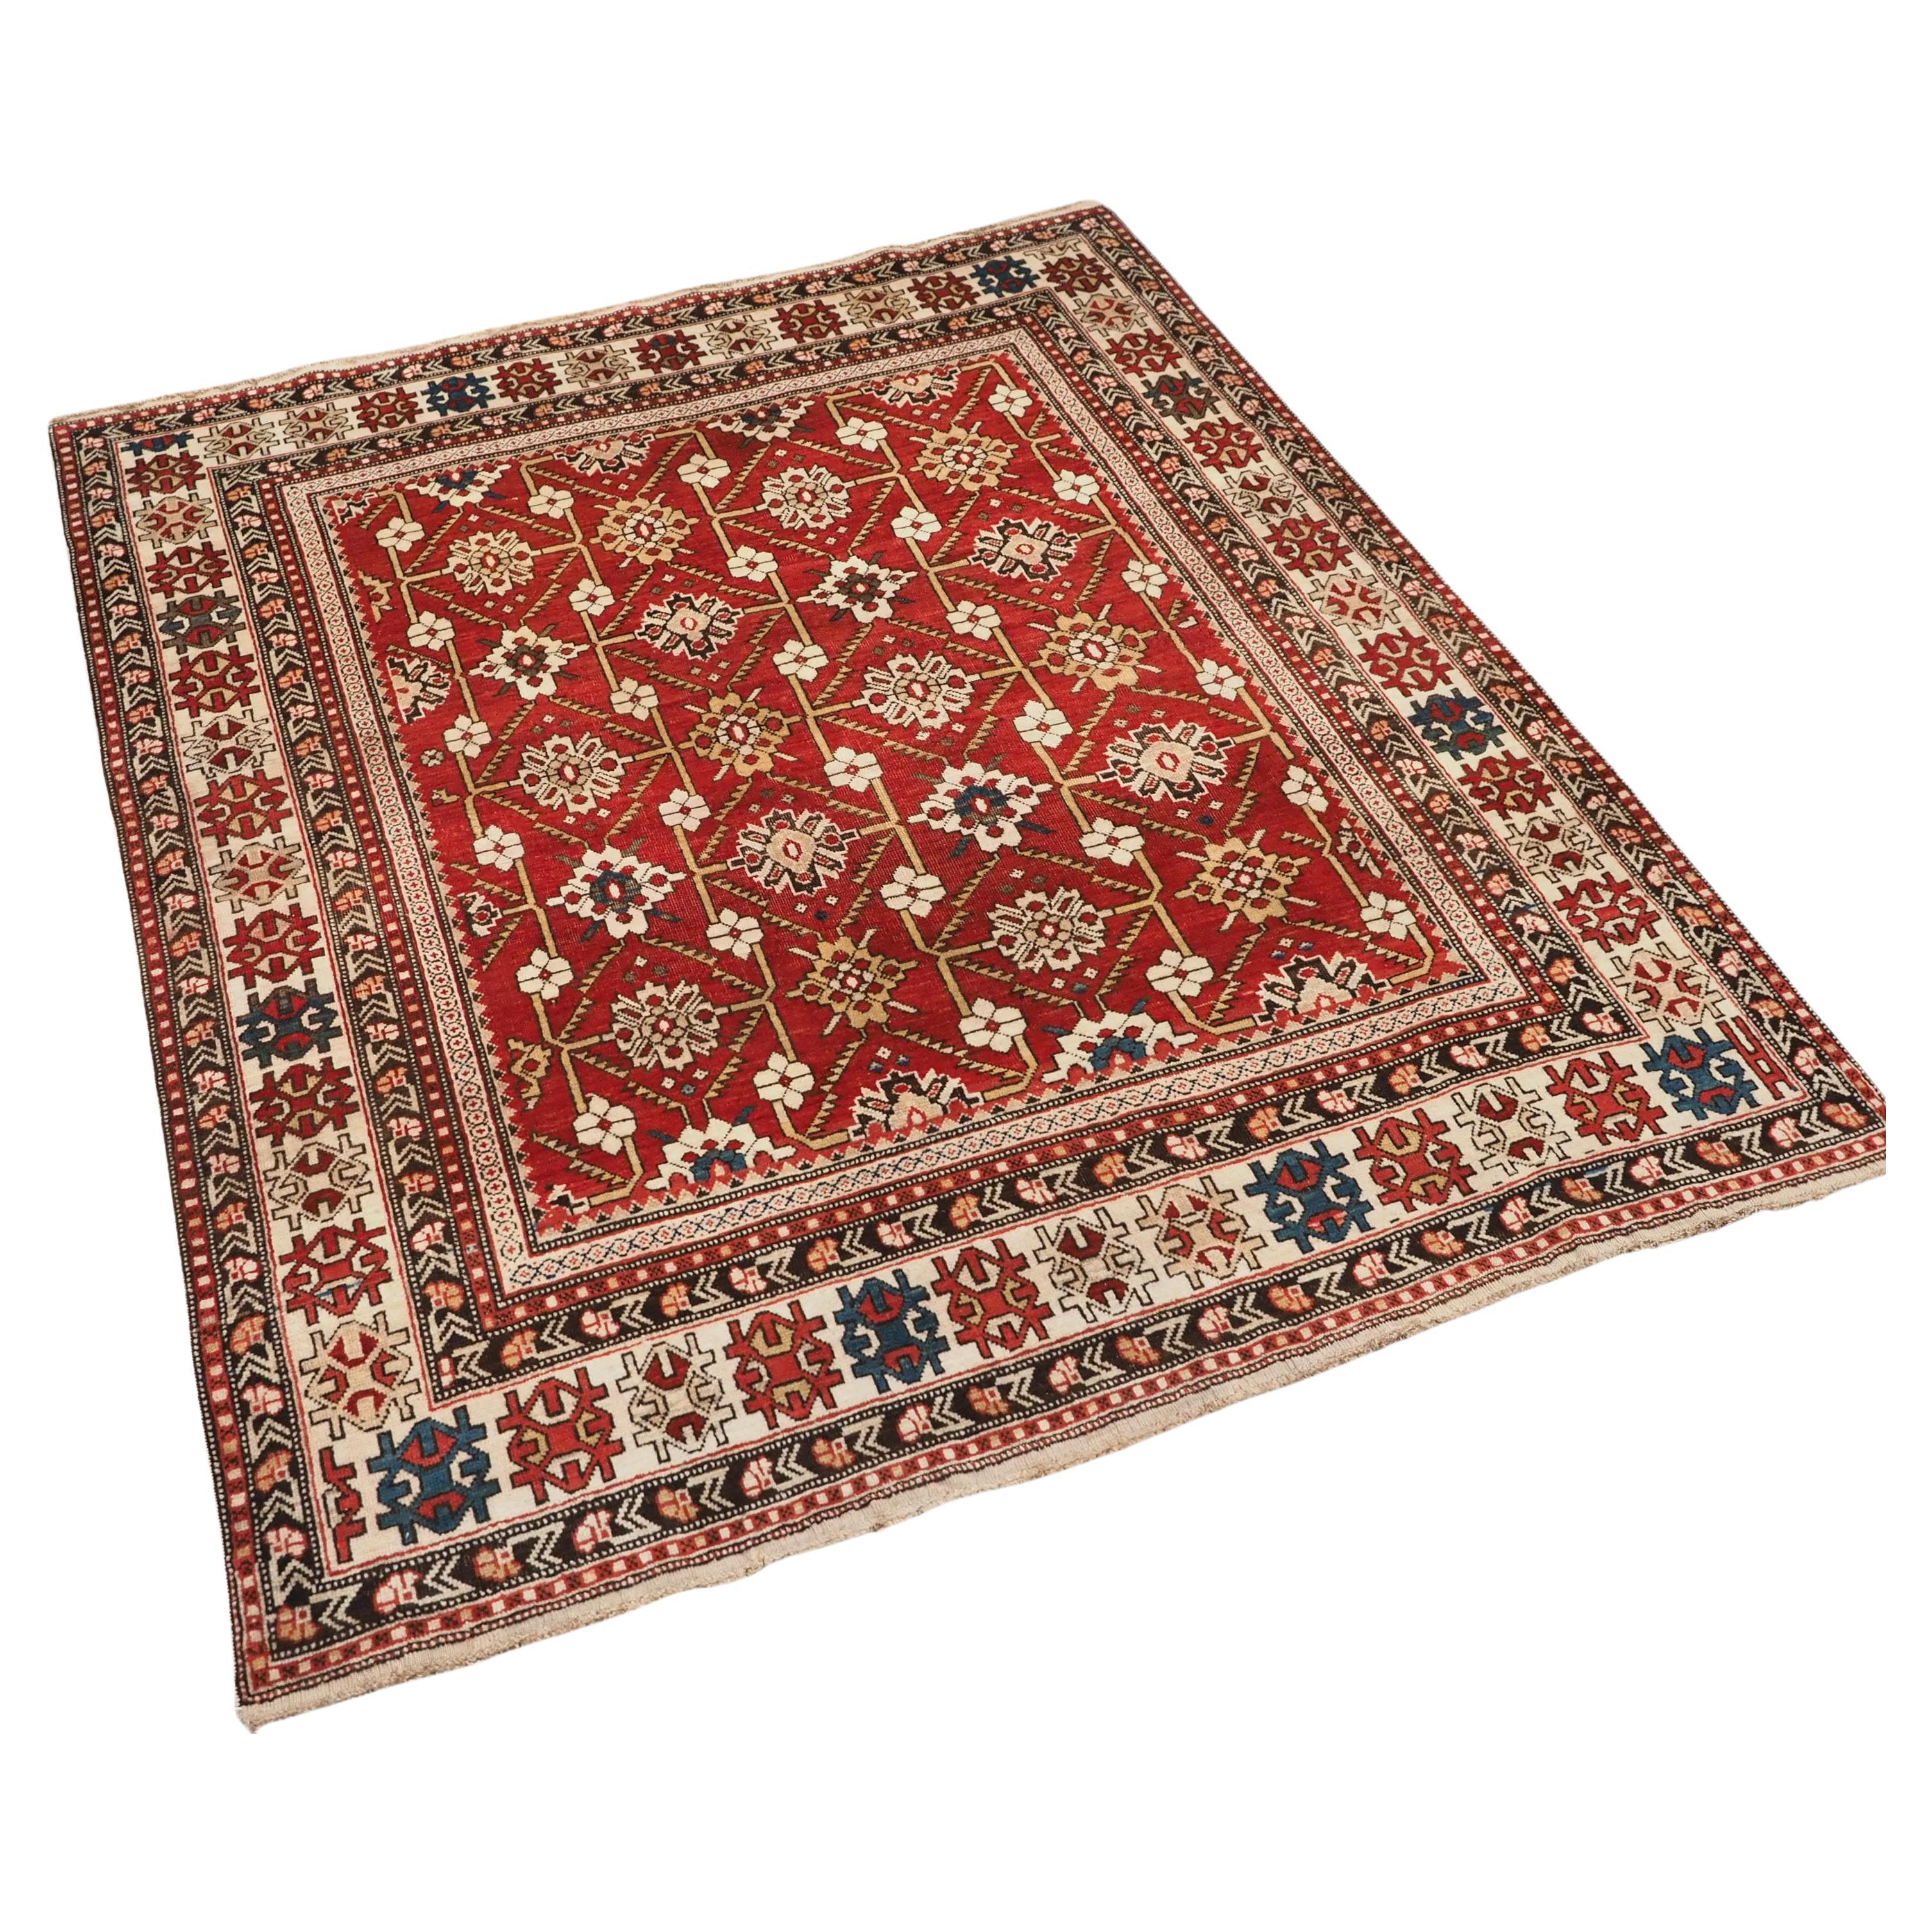 Antique South East Caucasian Shirvan rug with bold floral lattice design. For Sale